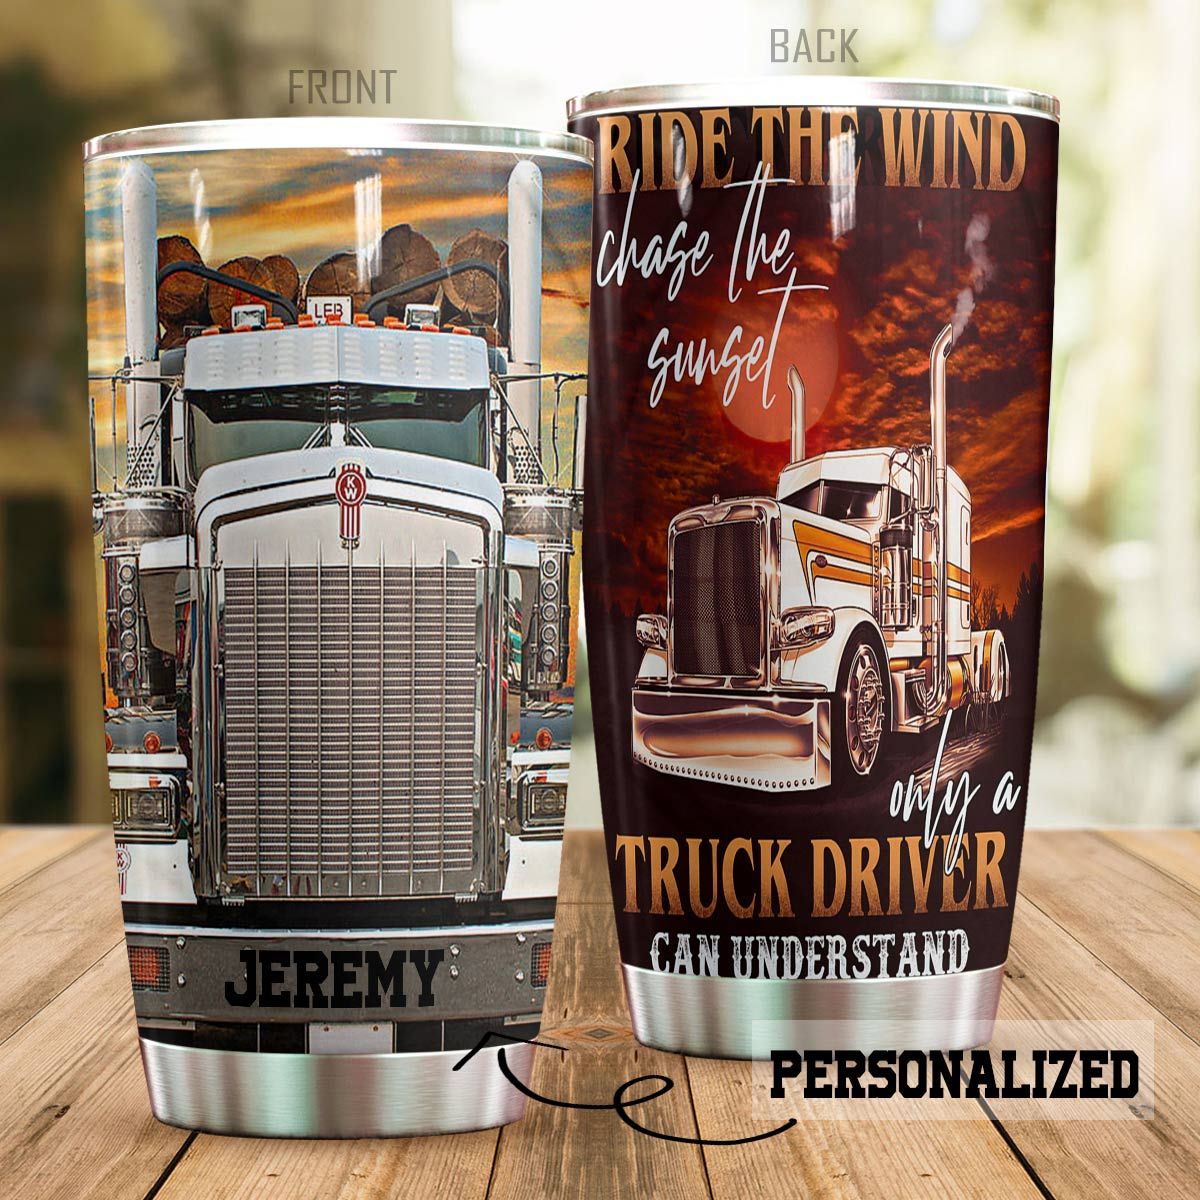 Personalized trucker ride the wind tumbler 1